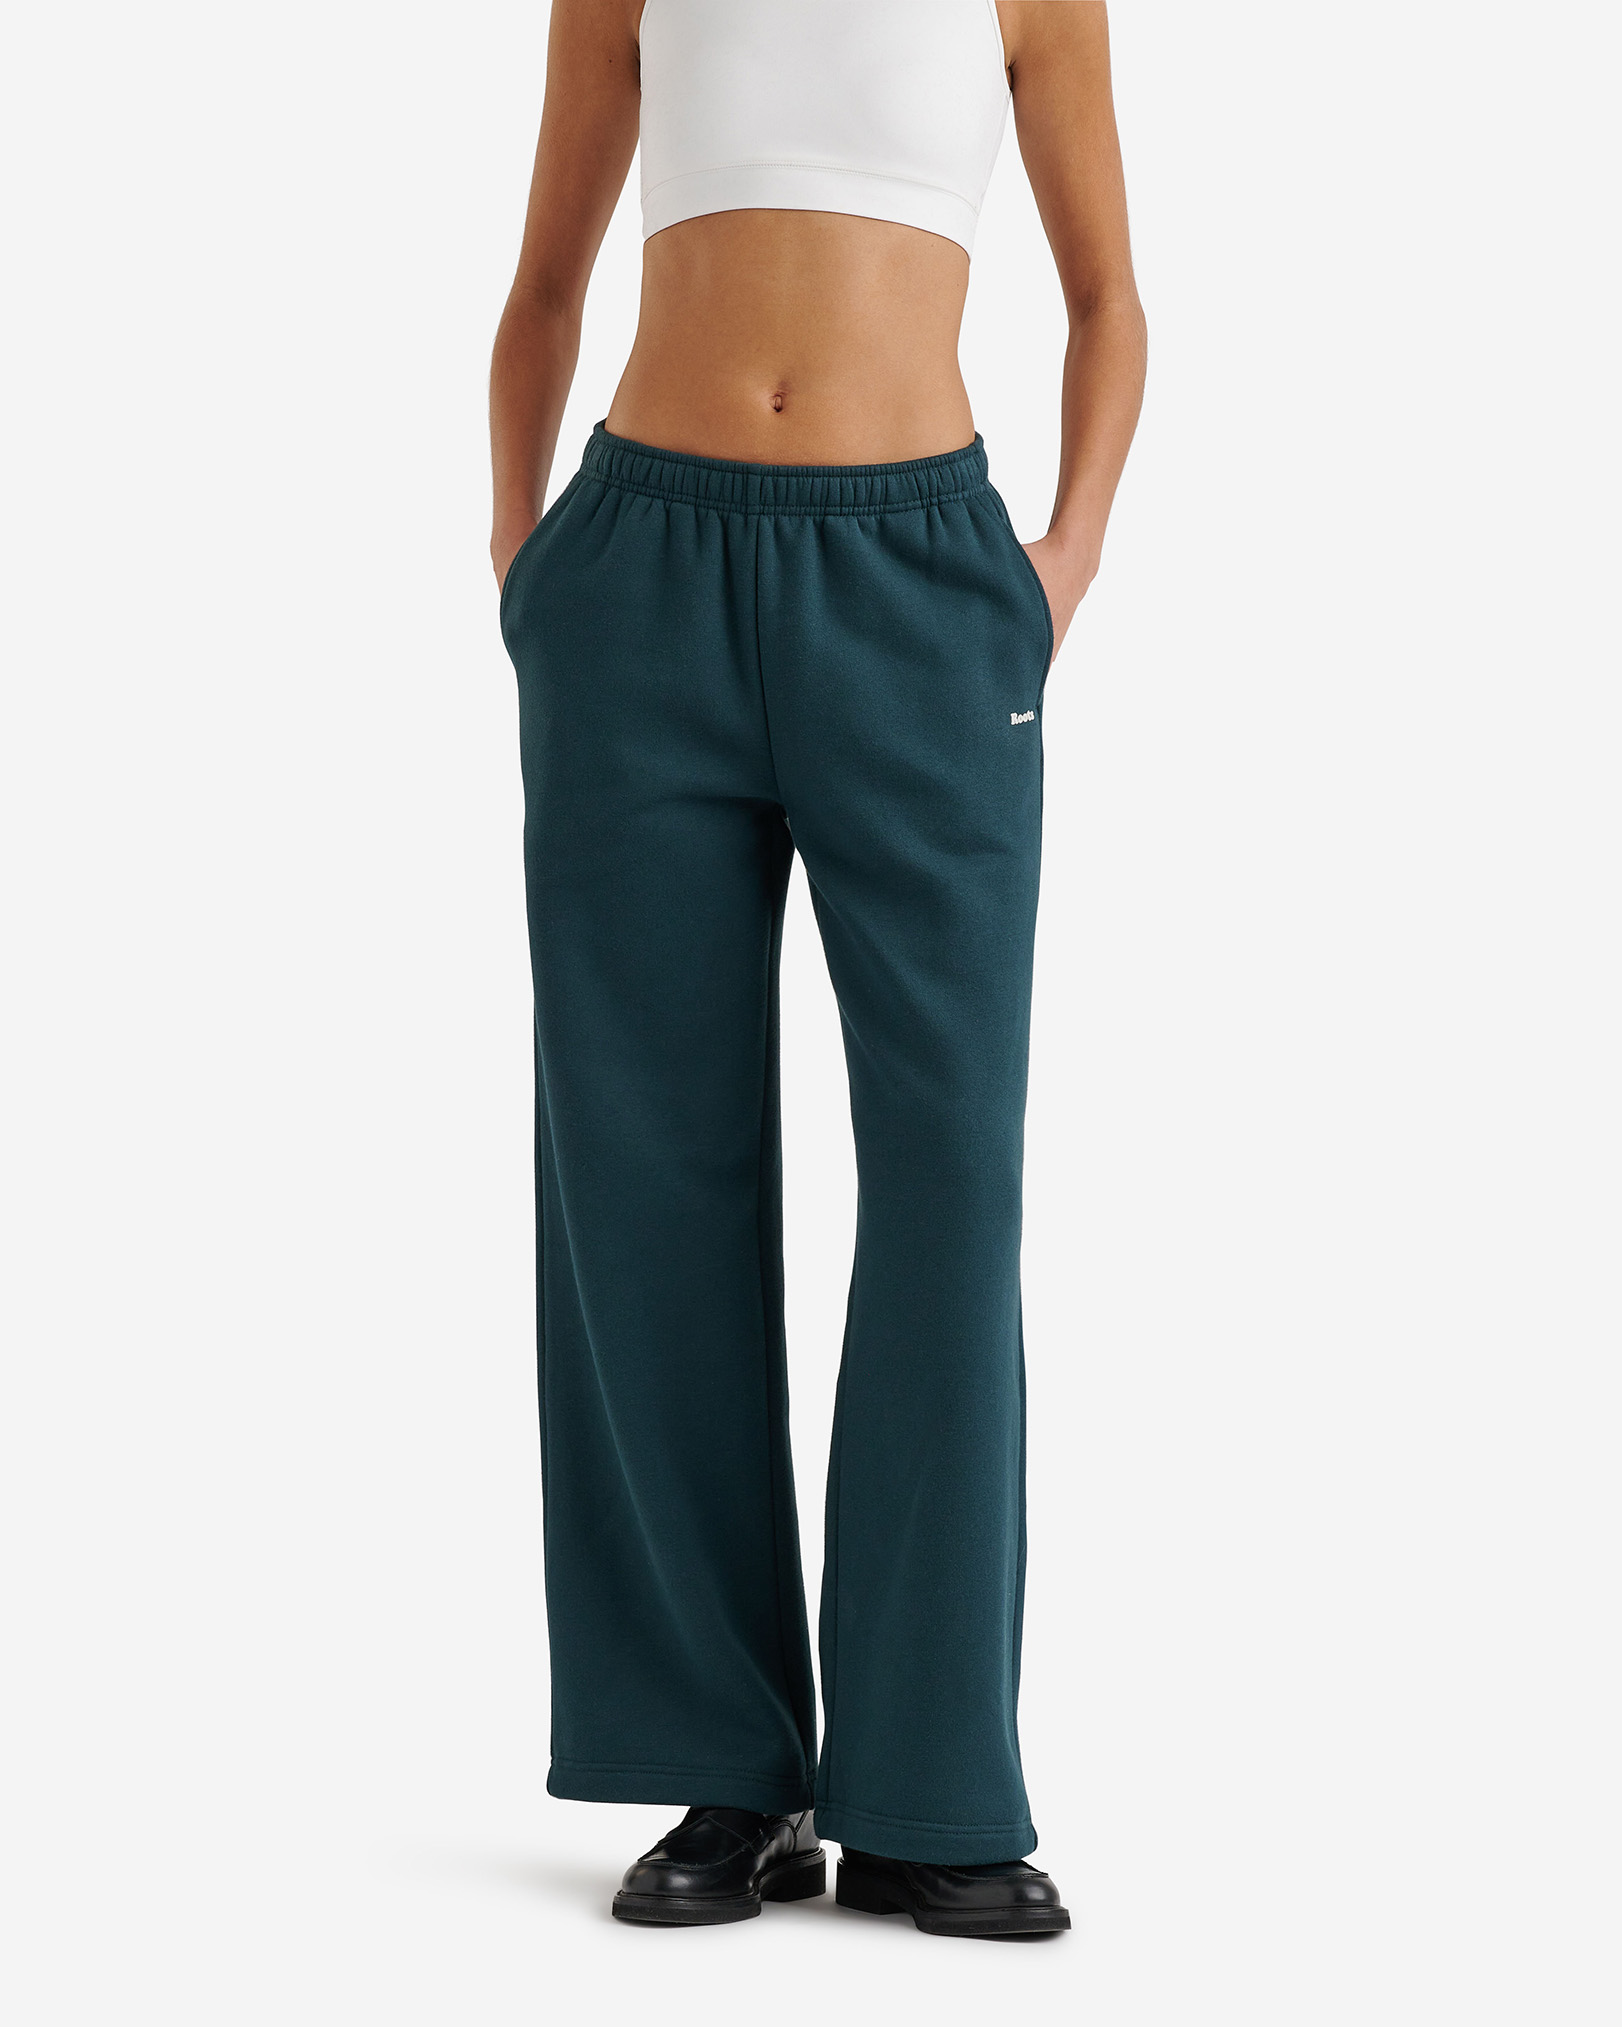 Roots Cloud Wide Leg Sweatpant in Forest Teal